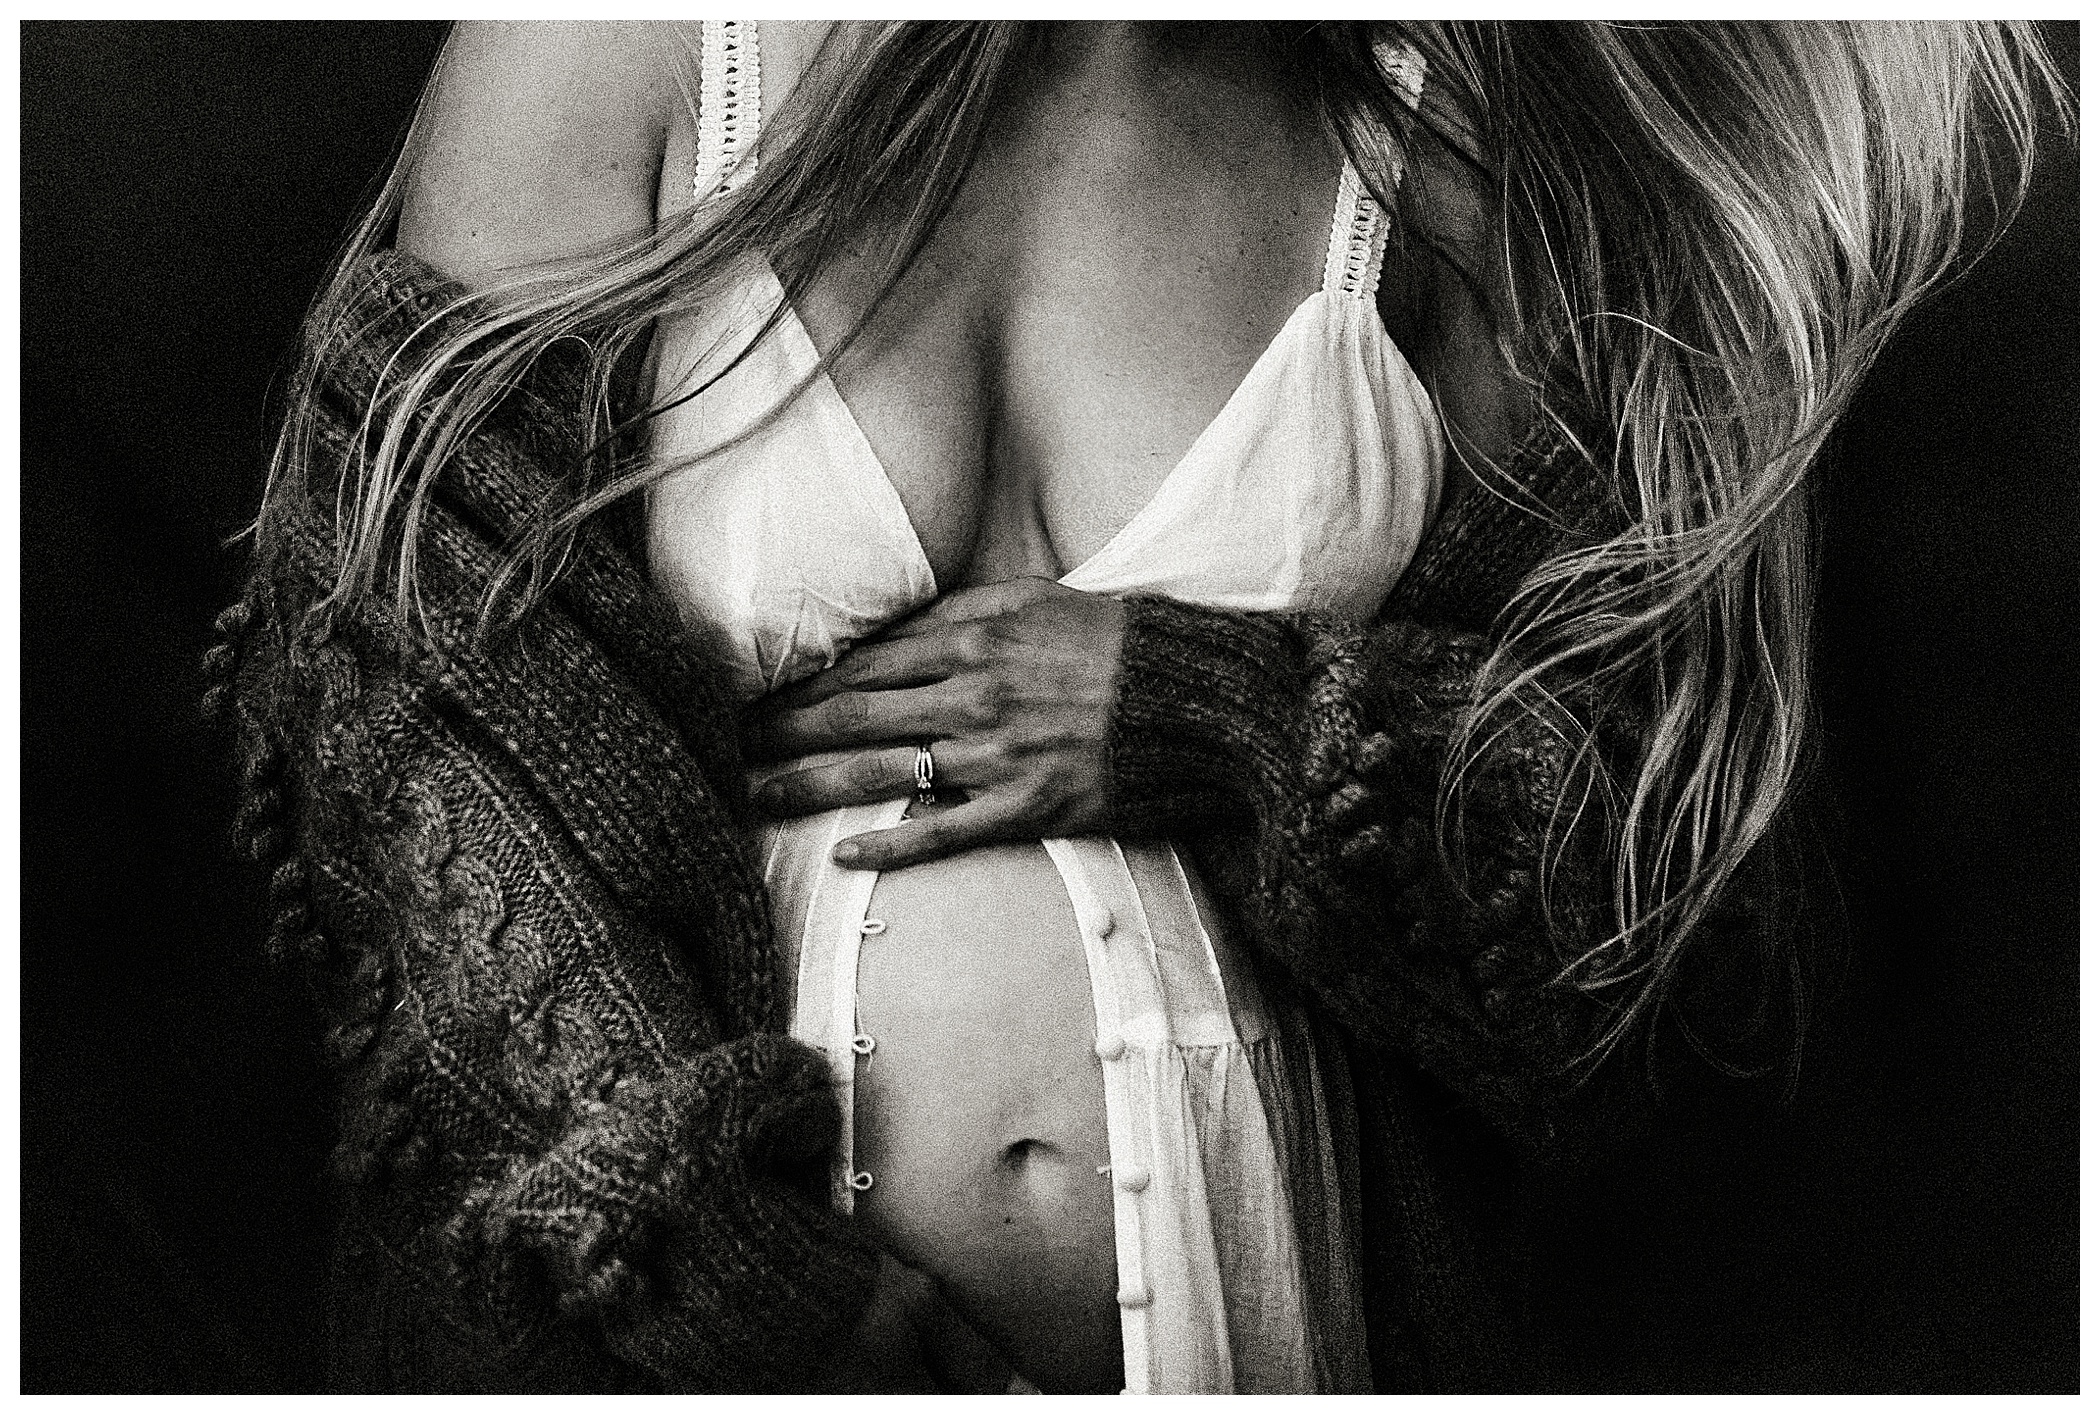 black and white close up maternity session artistic wild and moody pregnant woman holding her belly at outdoor maternity session O'fallon Missouri fine art photographer